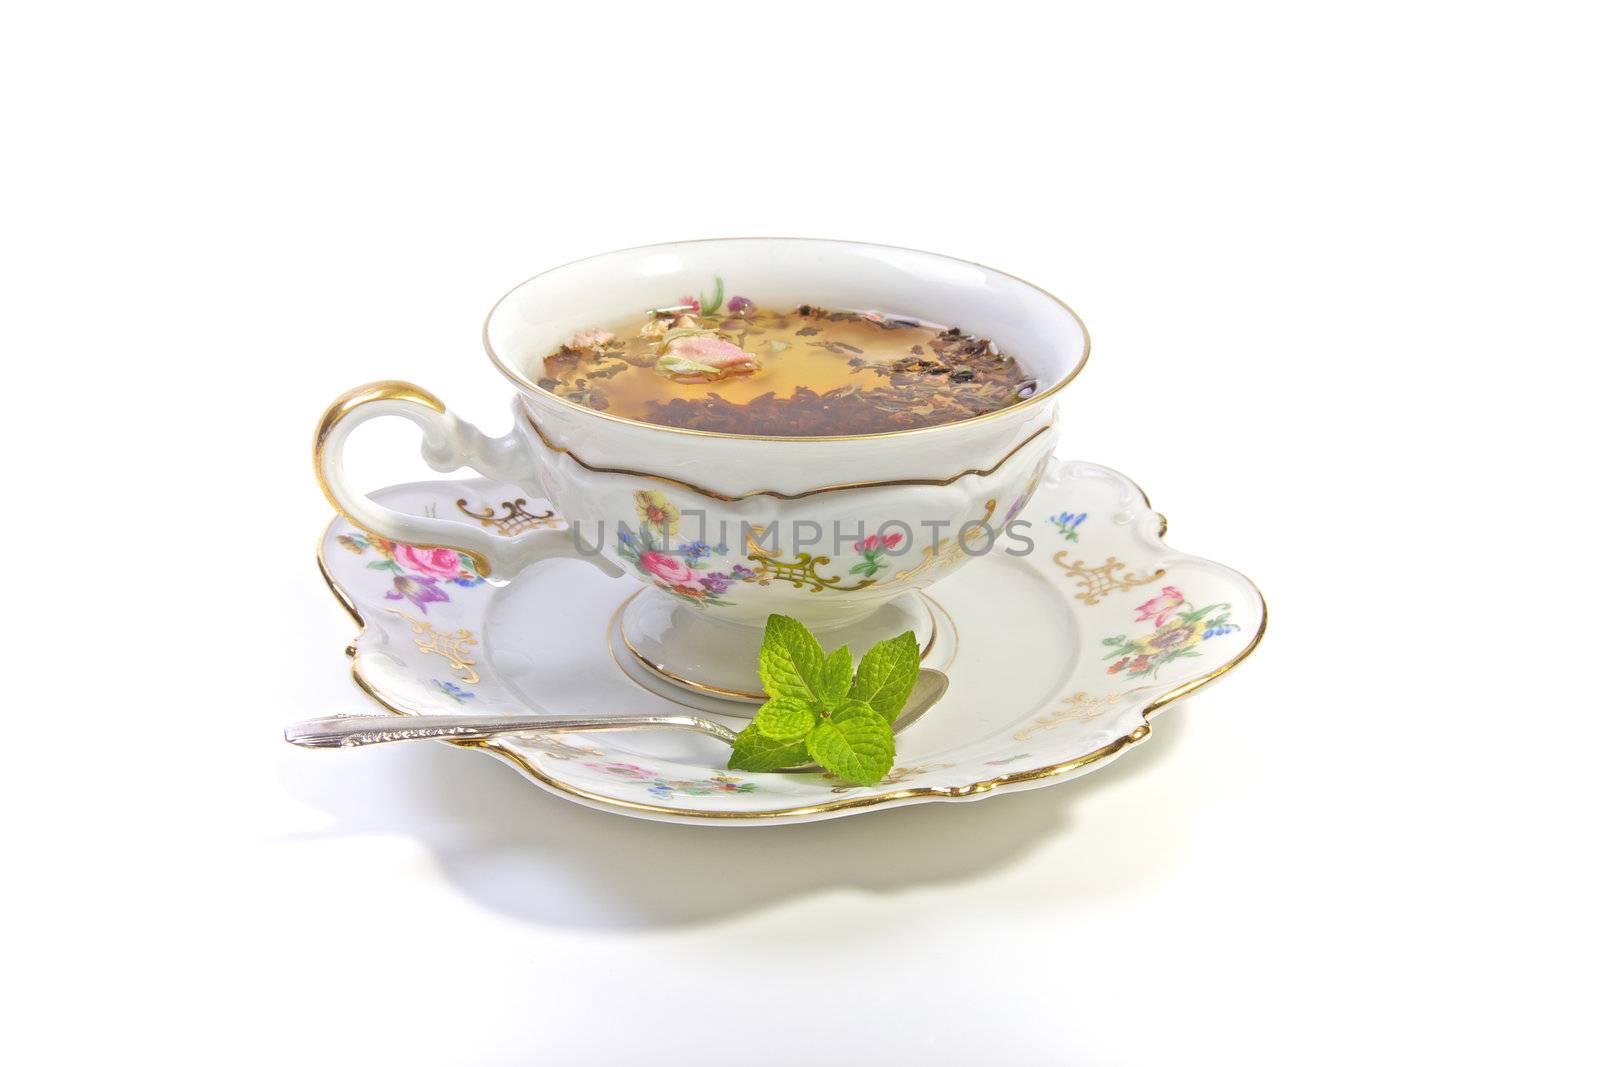 Delicate porcelian cup of tea for a refreshing High Tea